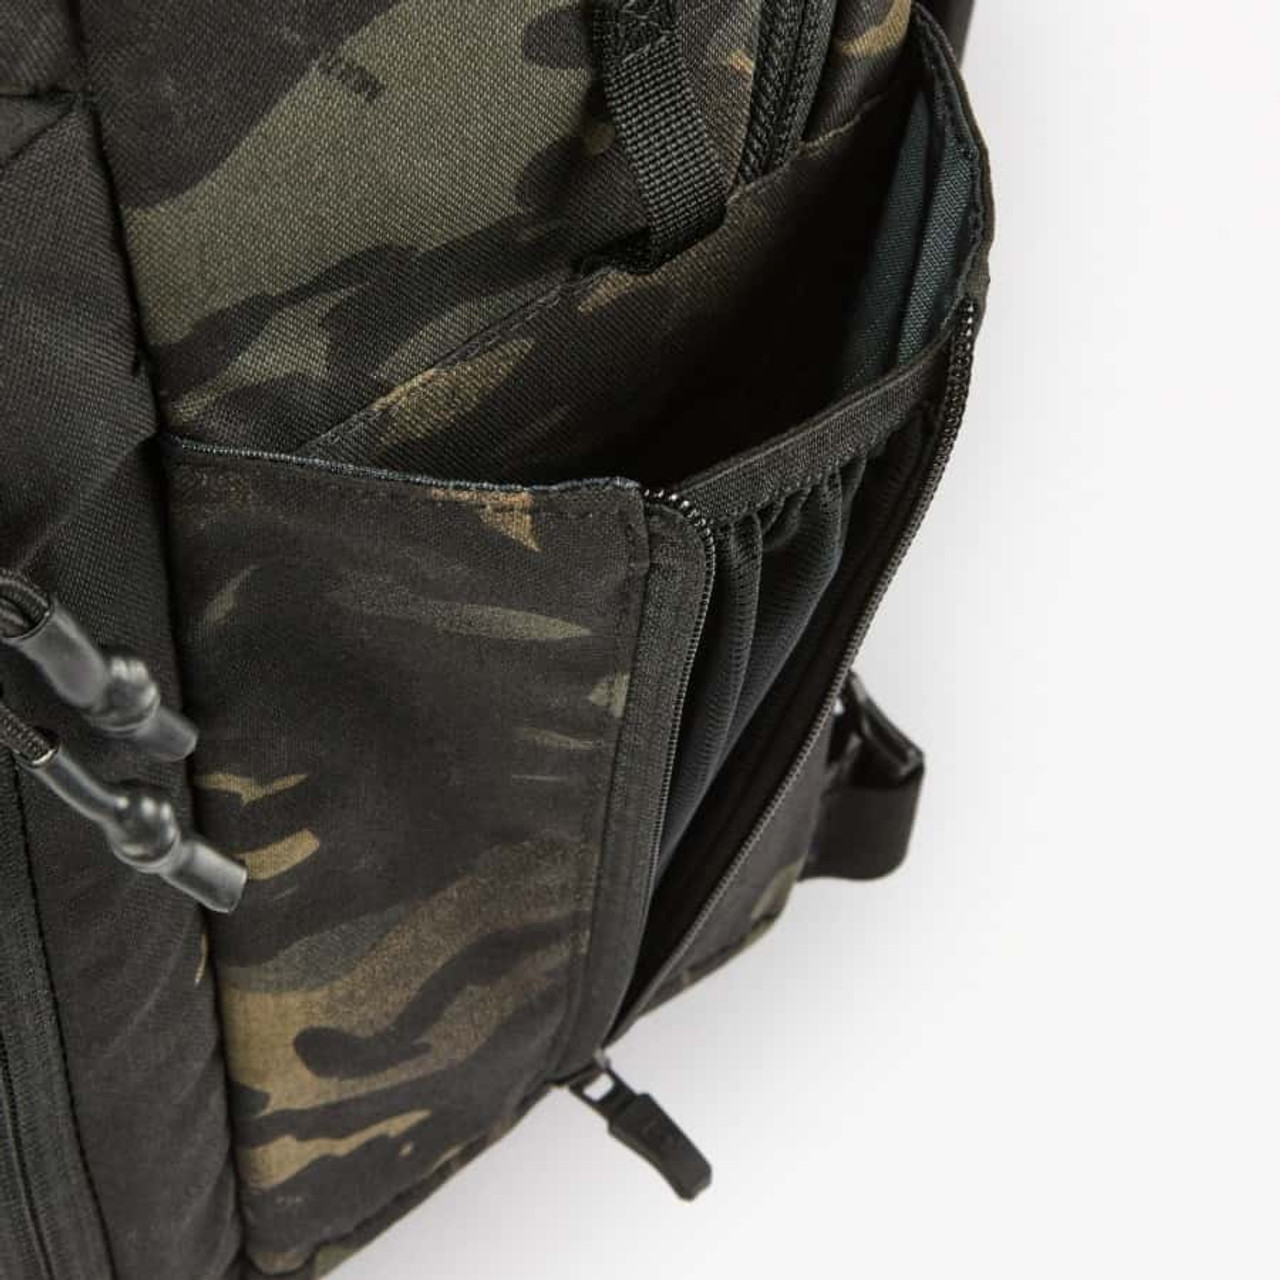 VIKTOS Perimeter 25 Backpack - Off-Grid, Undercover, or in the Office ...